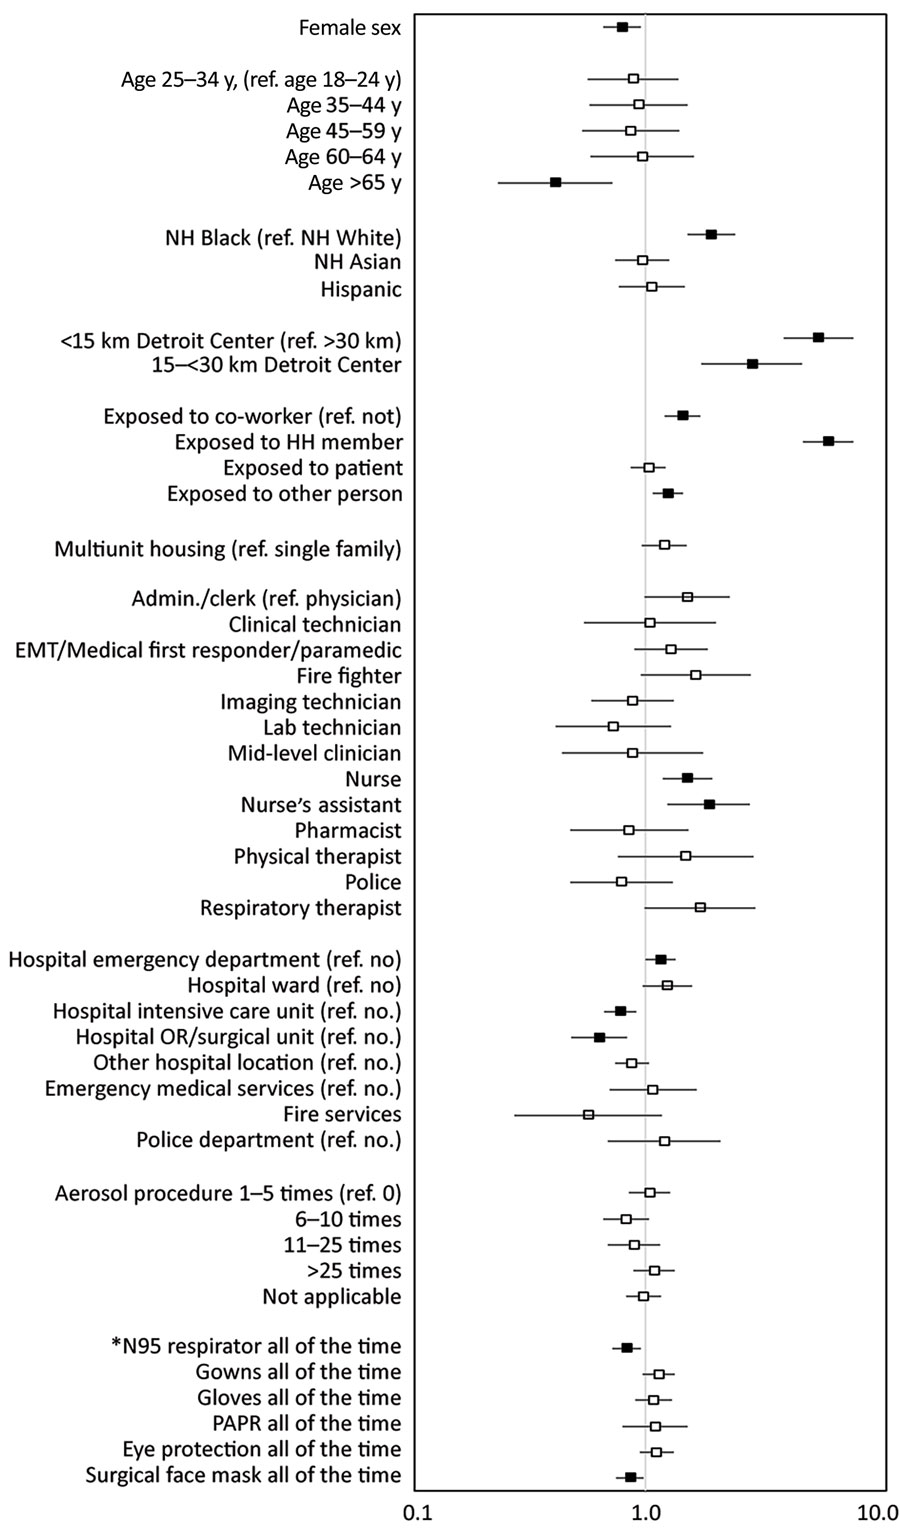 Adjusted odds ratios and 95% CIs for seropositivity for SARS-CoV-2 among healthcare, first response, and public safety personnel, Detroit metropolitan area, Michigan, USA, May–June 2020. Adjusted model was estimated using generalized estimating equations including all variables shown. Participants with other occupations, of other race/ethnicity, or who declined to provide their race/ethnicity are included in the models, but not shown as separate categories. Workplace variables are not mutually exclusive. Reference categories are noted in parentheses for each section. ED, emergency department; EMT, emergency medical technician; HH, household; Med 1st resp, medical first responder; NH, non-Hispanic; PAPR, powered air-purifying respirator; ref., reference; SARS-CoV-2, severe acute respiratory syndrome coronavirus 2. *Reference groups for personal protective equipment variables are all other responses with less frequency than “all the time.”